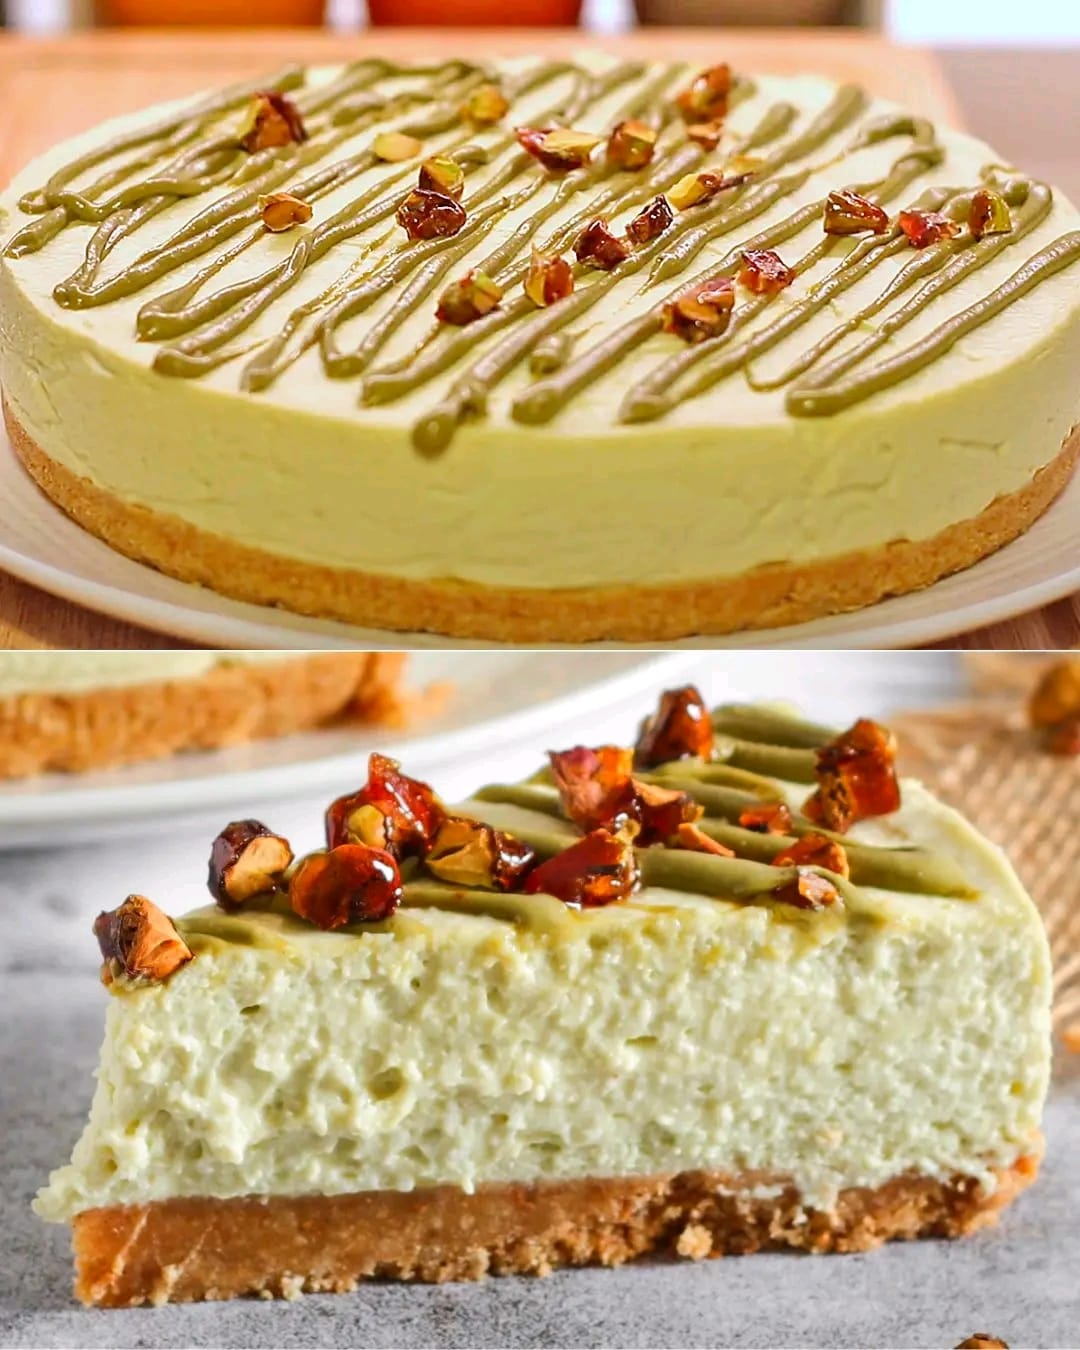 CHEESE AND PISTACHIO CAKE